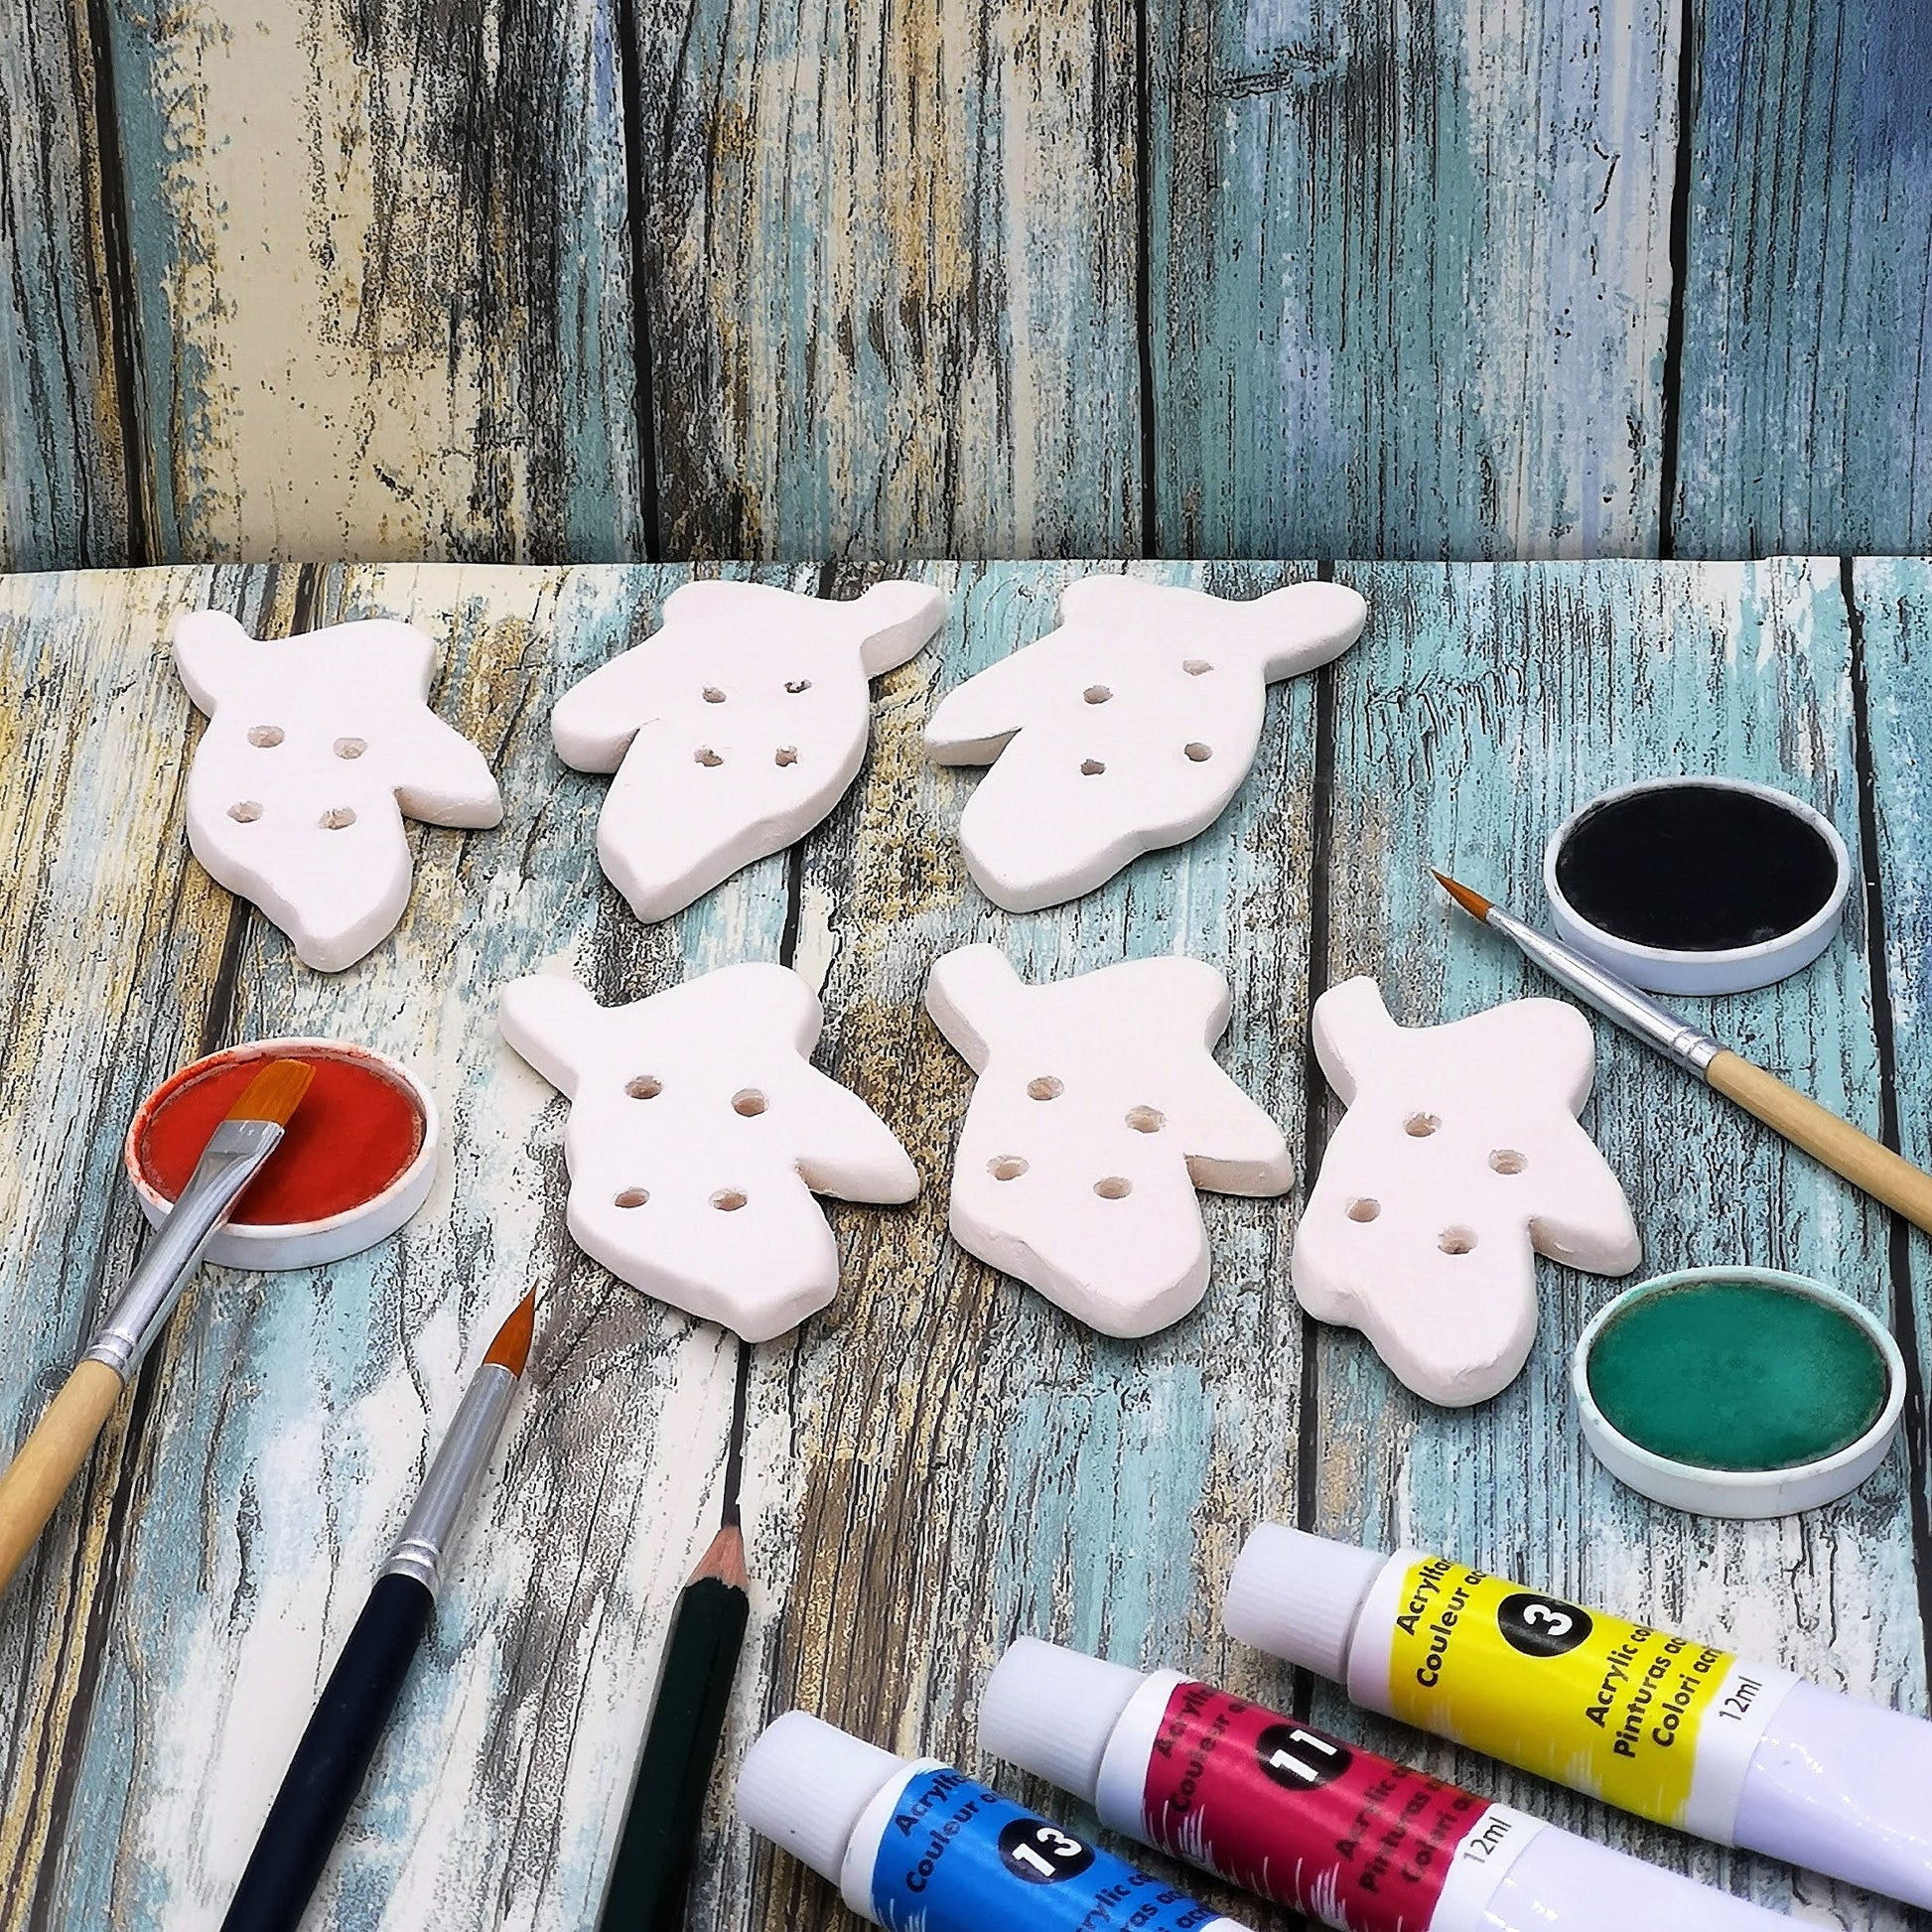 HALLOWEEN BUTTONS, CERAMIC Bisque Button Lot, Set of 6 Blank Ghost Shaped Sewing Buttons To Paint, Diy Craft Kit Customizable Ready To Paint - Ceramica Ana Rafael